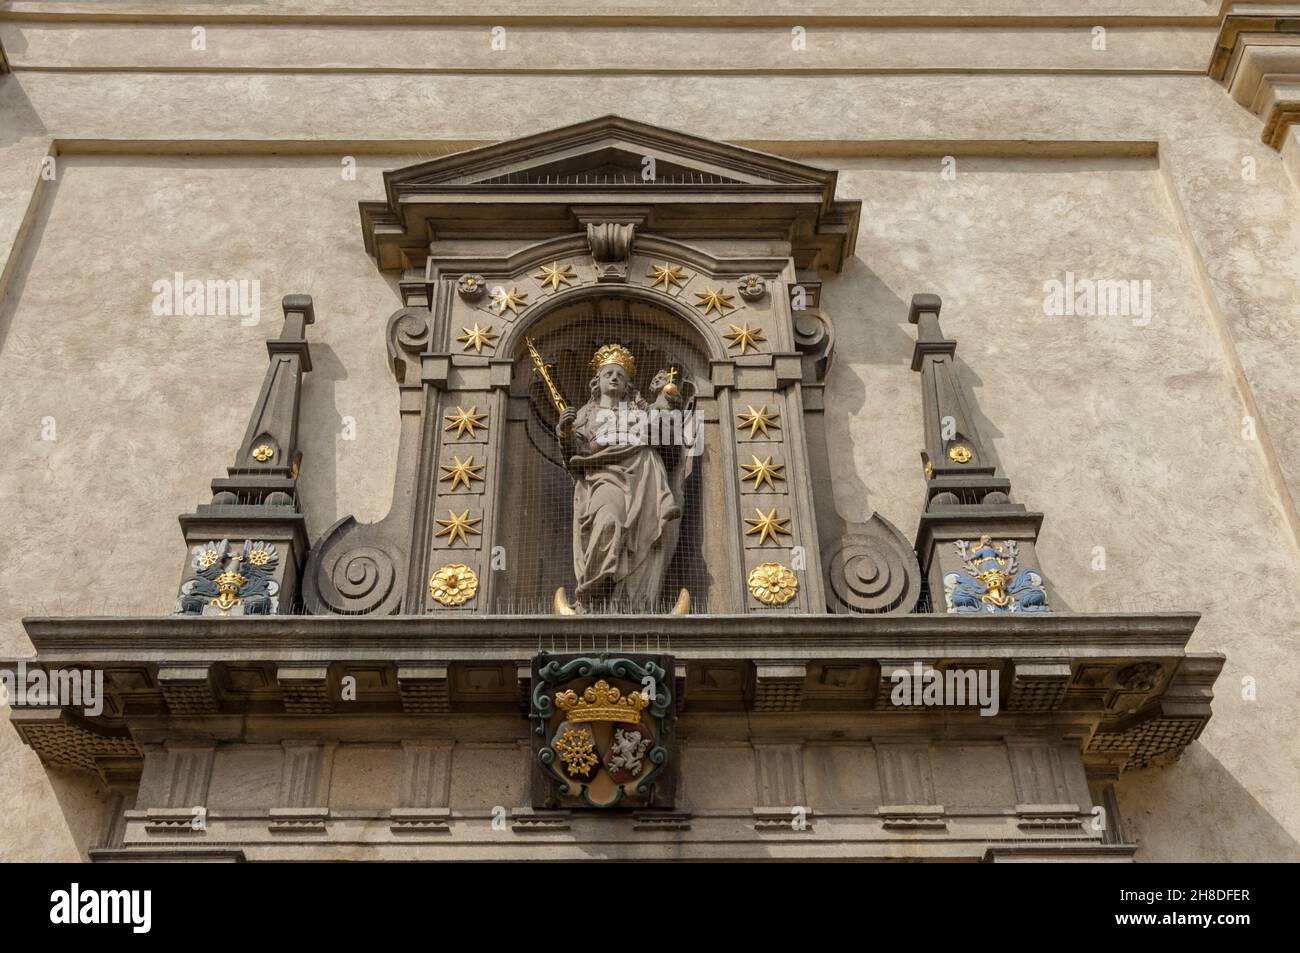 The ornate statue of 'Our Lady with the Child Jesus' above the entrance to the Church of Our Lady of Victories in Karmelitská Street in Malá Strana Stock Photo